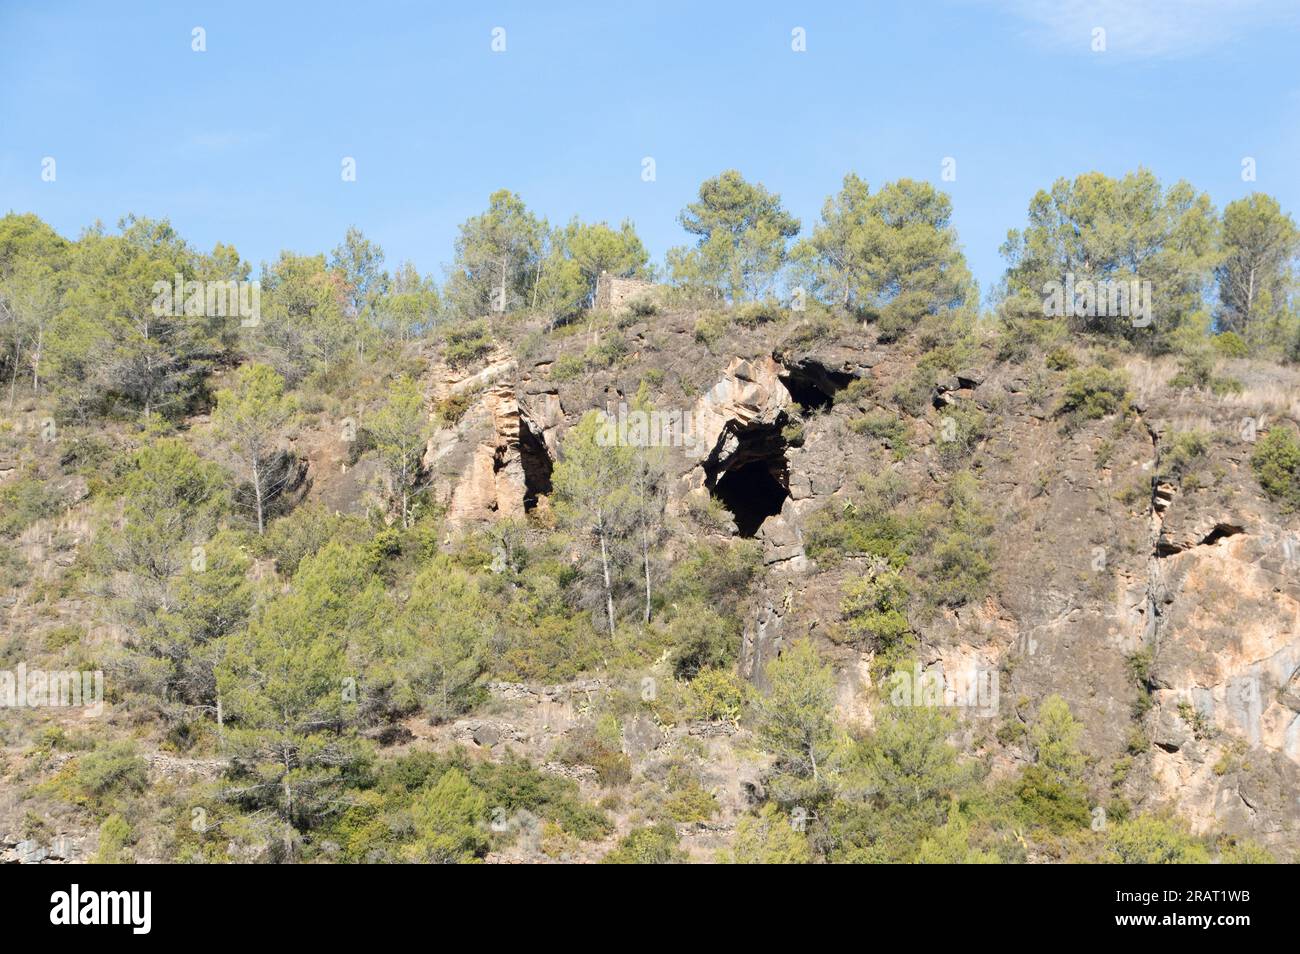 image of the caves among the pines, rural mountain area Stock Photo